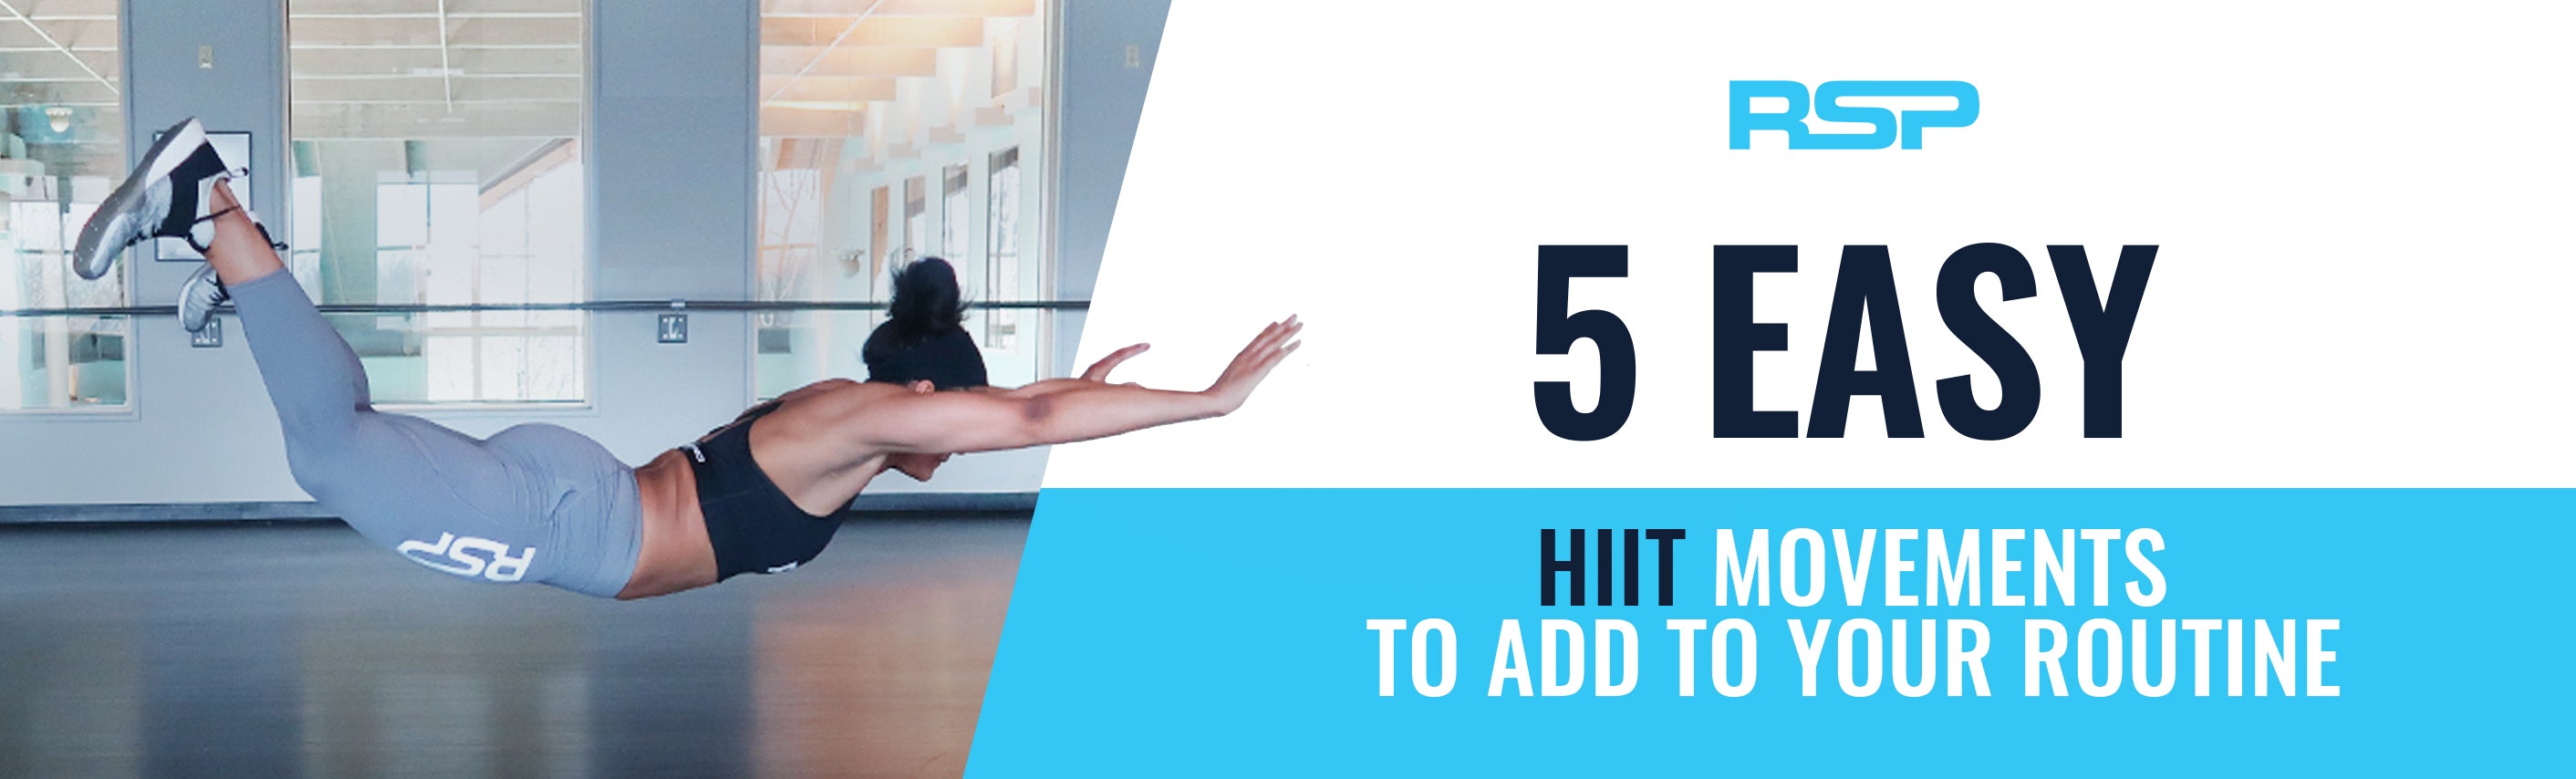 Five easy HIIT movements to add to your workout routine